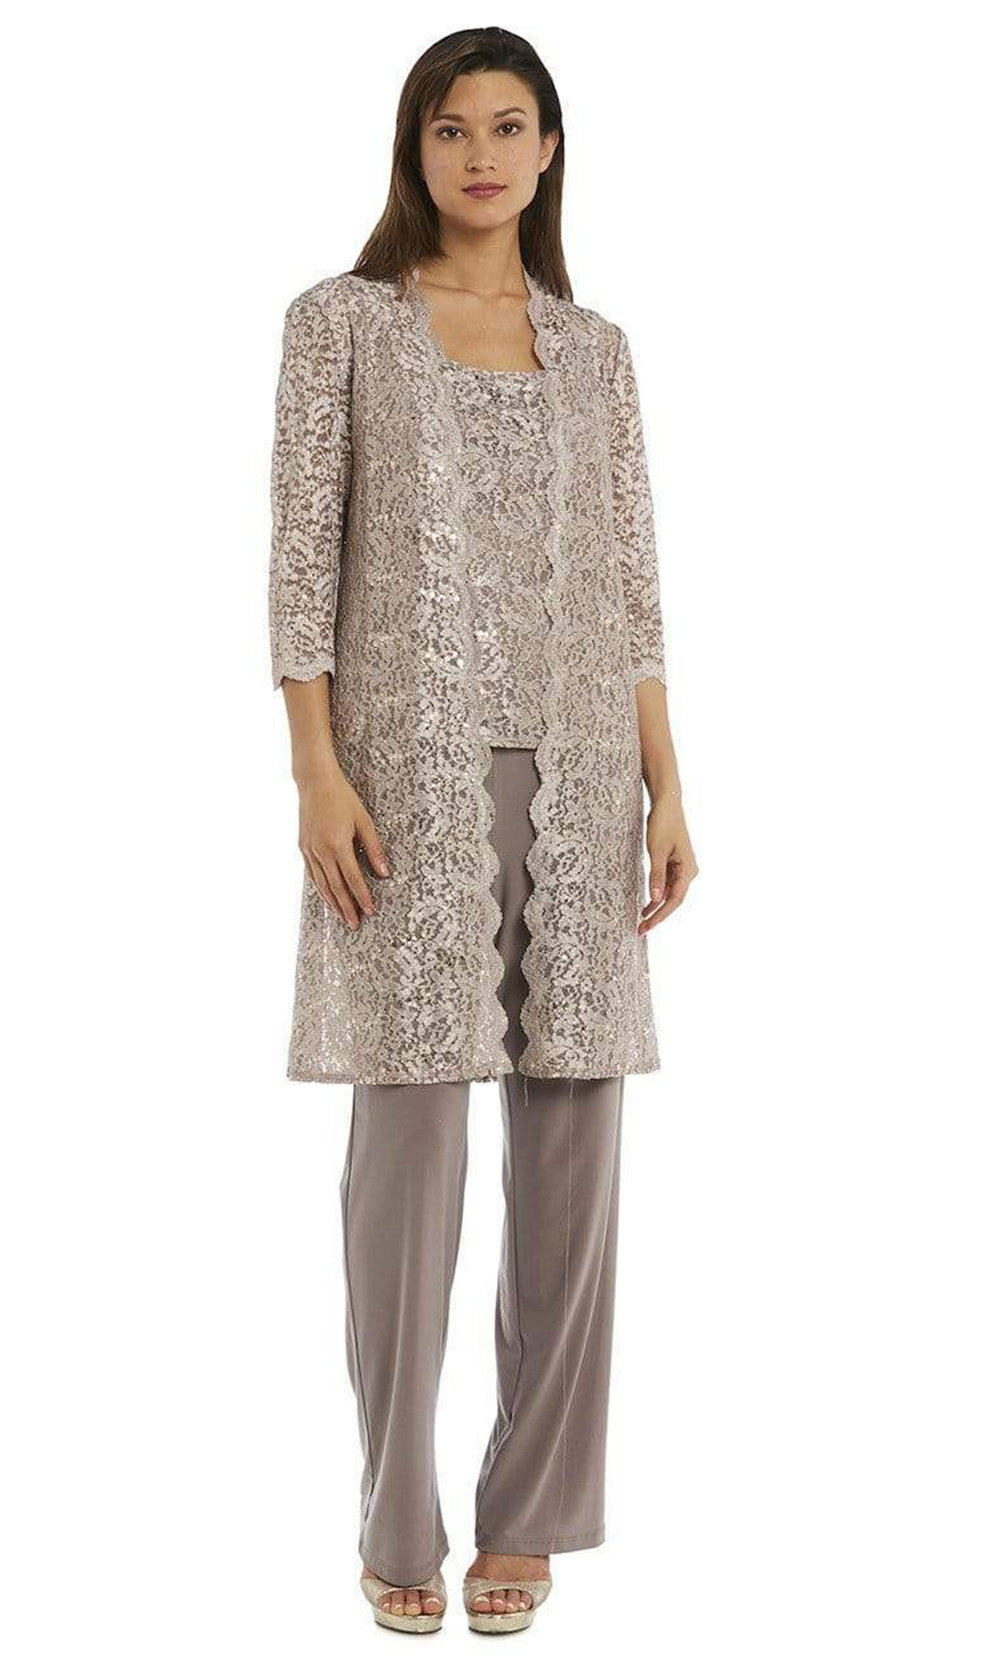 R&M Richards - 1993P Metallic Lace and Long-Line Jacket Three-piece Petite Pant Set - 1 pc Champagne In Size 12P Available CCSALE 12P / Champagne